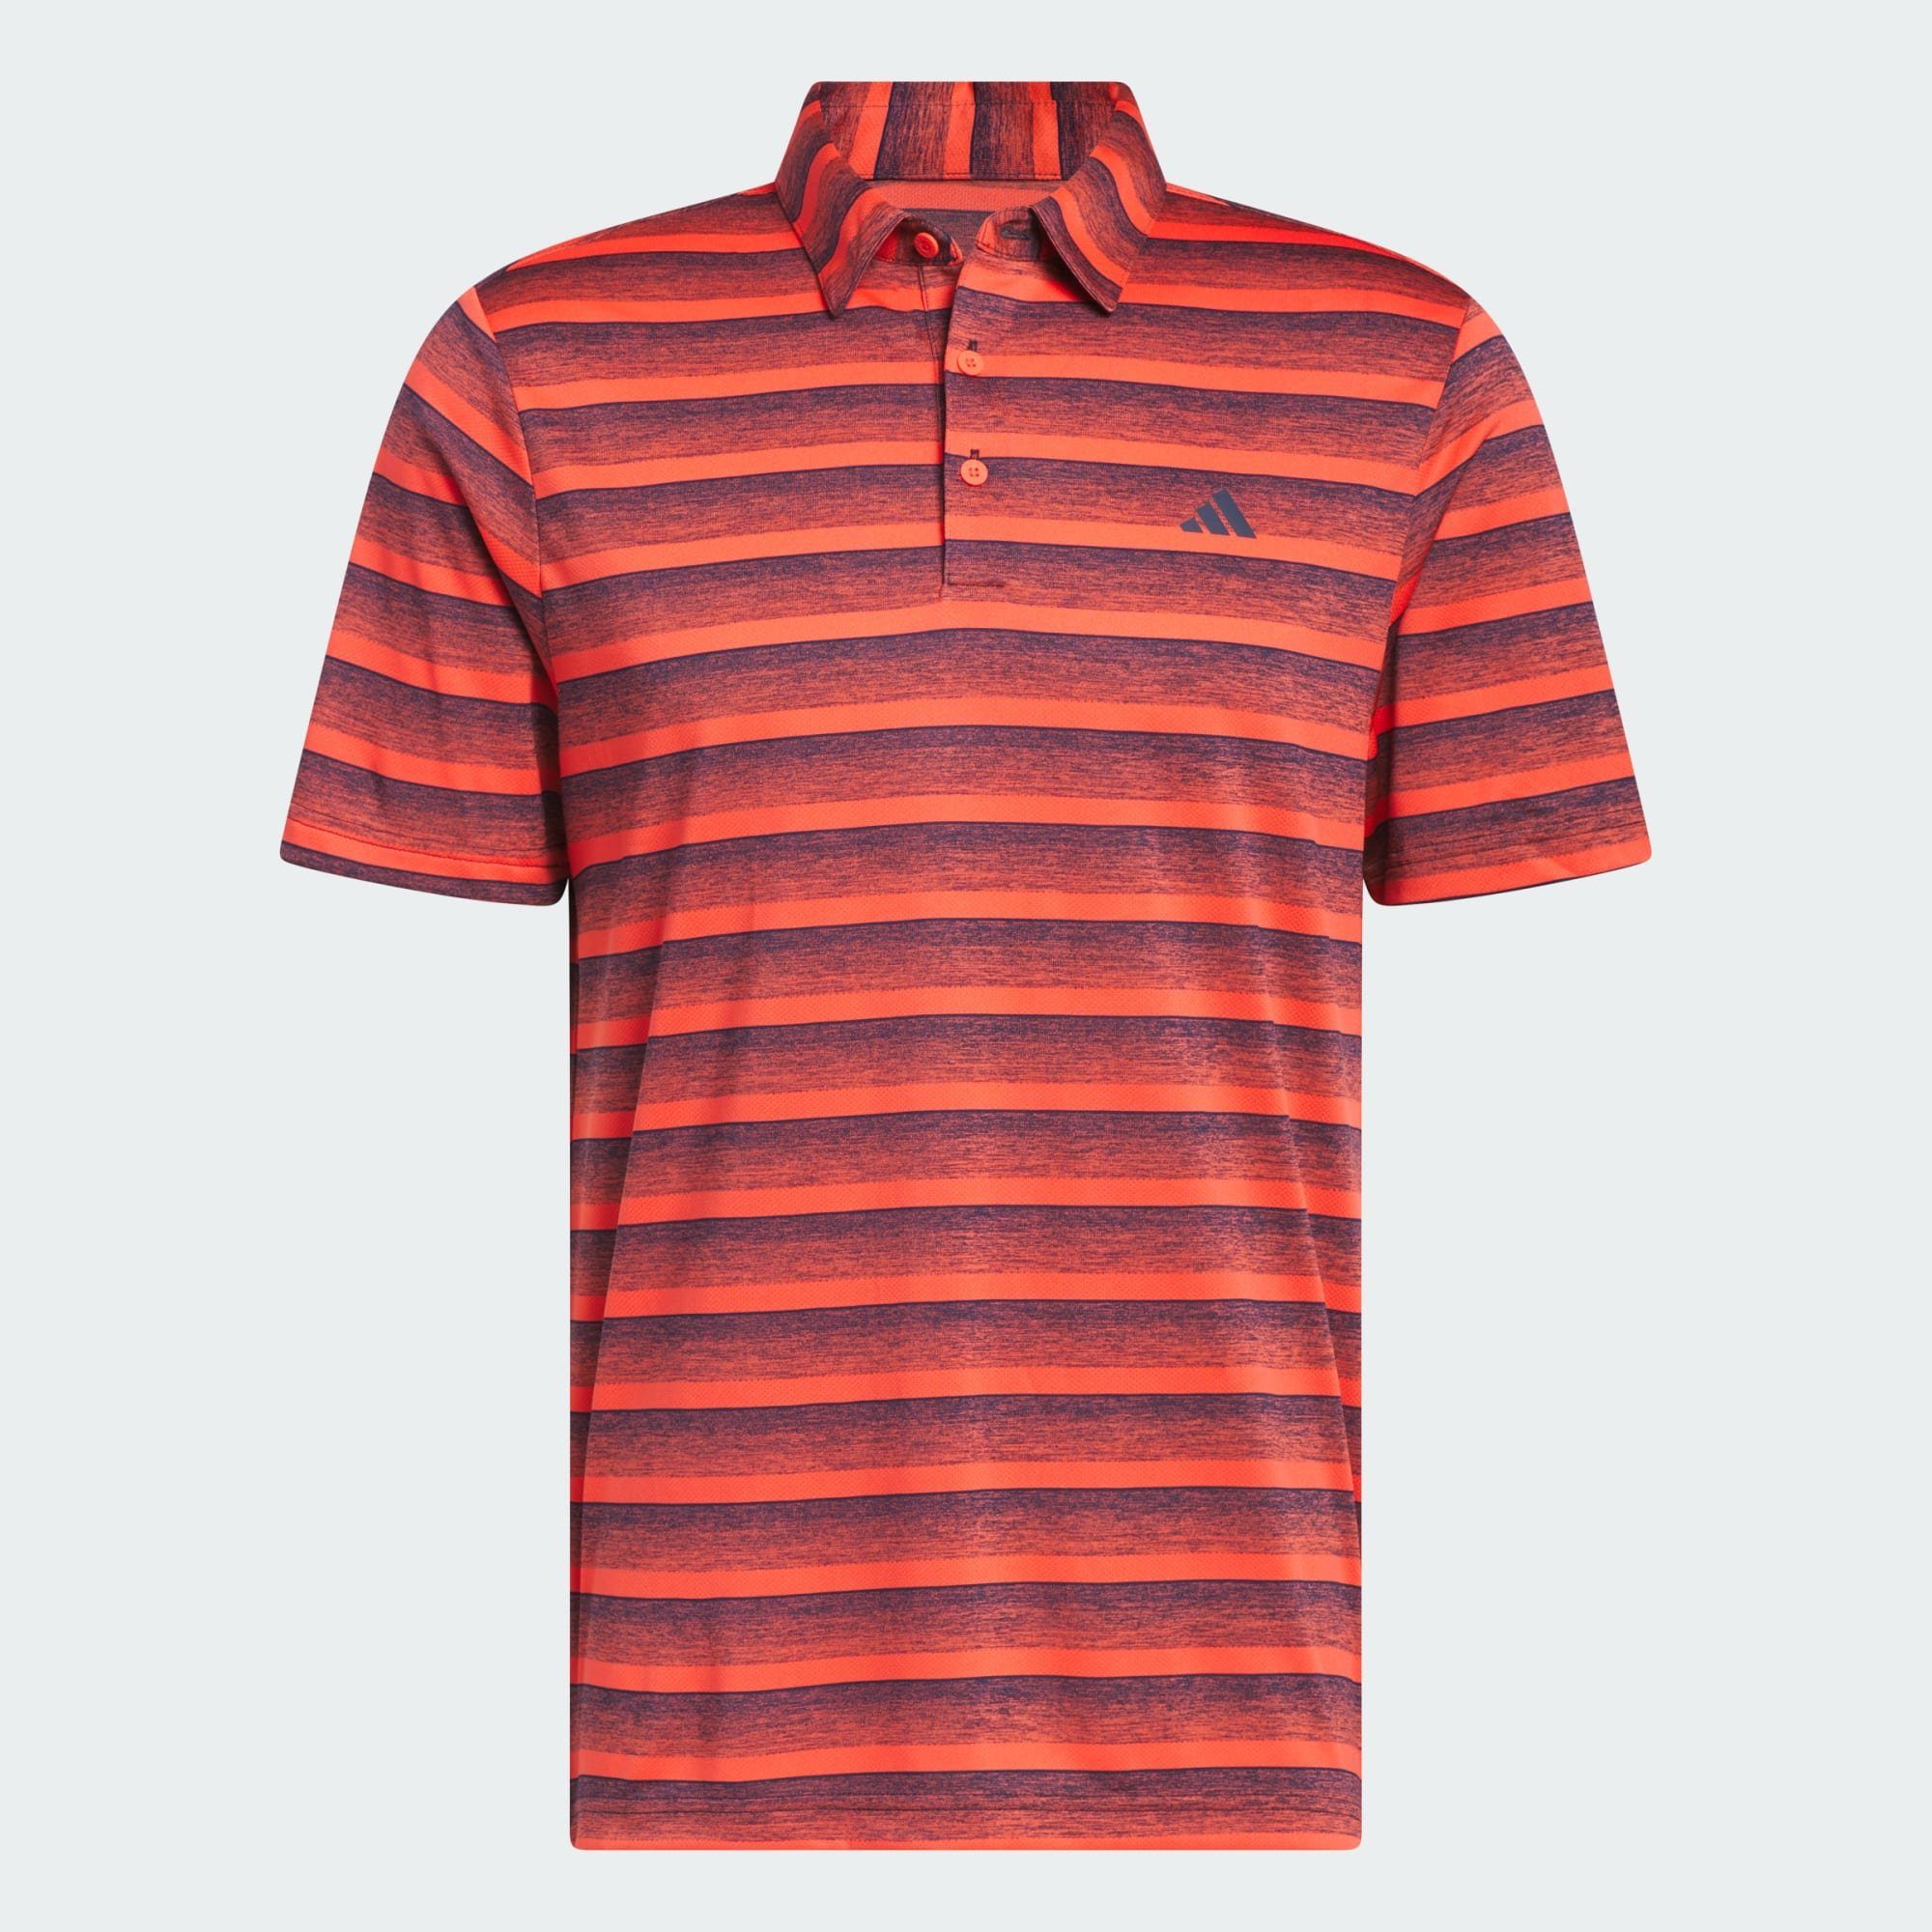 Performance / Bright adidas POLOSHIRT Funktionsshirt Navy STRIPE TWO-COLOR Collegiate Red